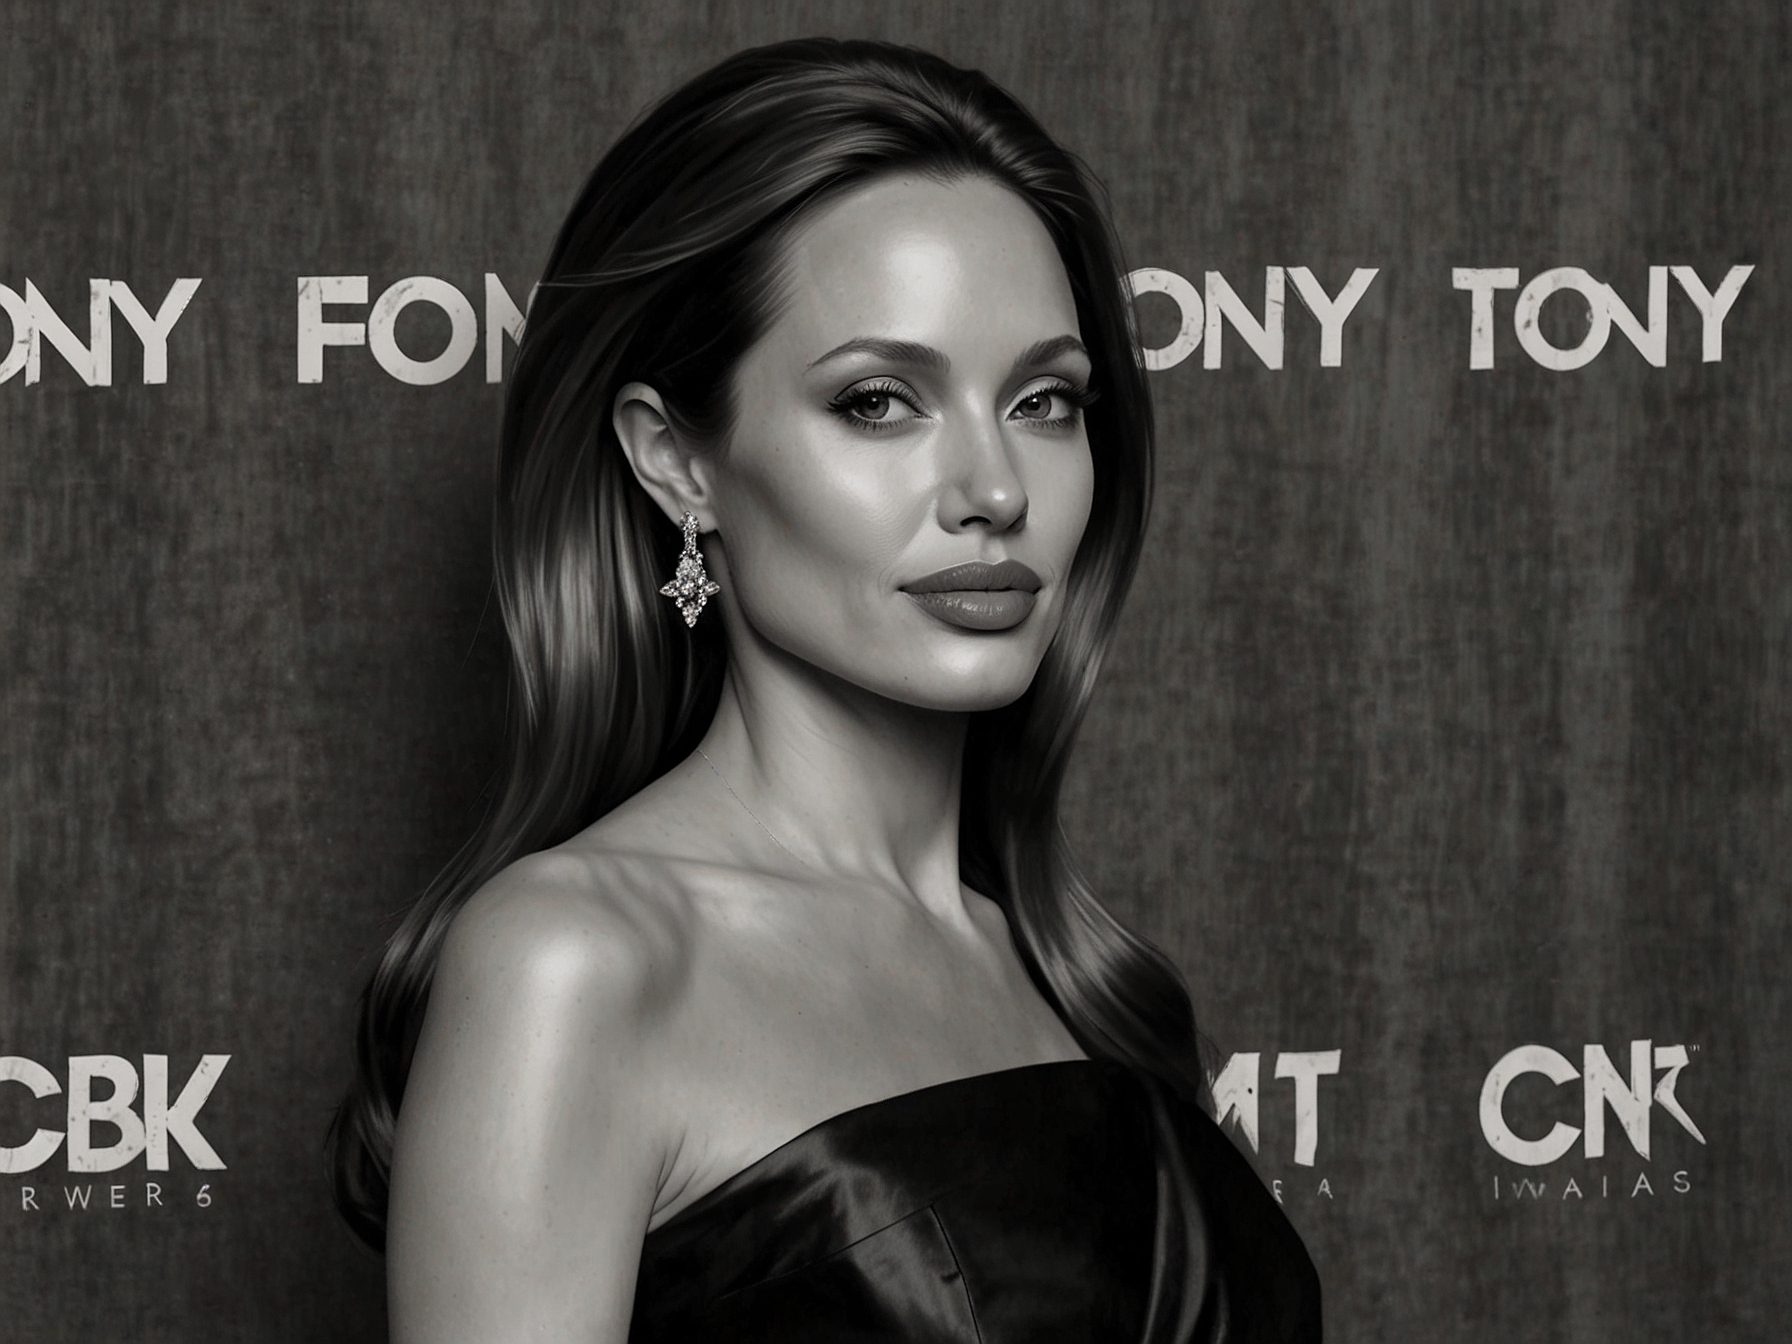 Angelina Jolie and daughter Vivienne Jolie-Pitt grace the red carpet at the Tony Awards, both exuding elegance and style, highlighting their strong familial bond and dedication to the arts.